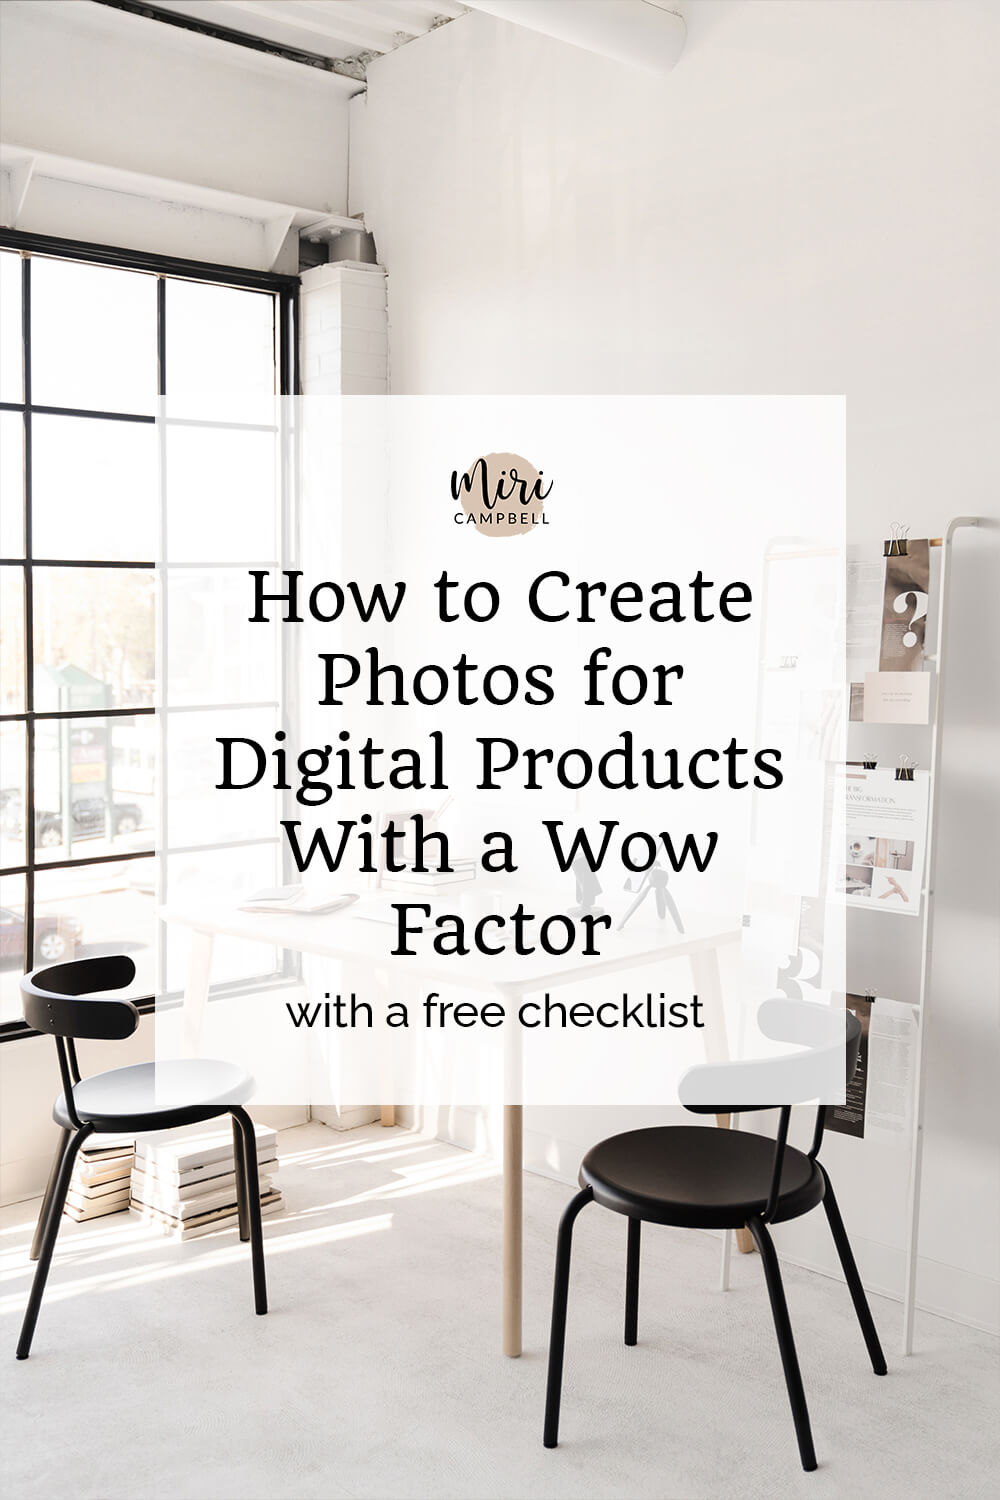 How to Create Photos for Digital Products With a Wow Factor